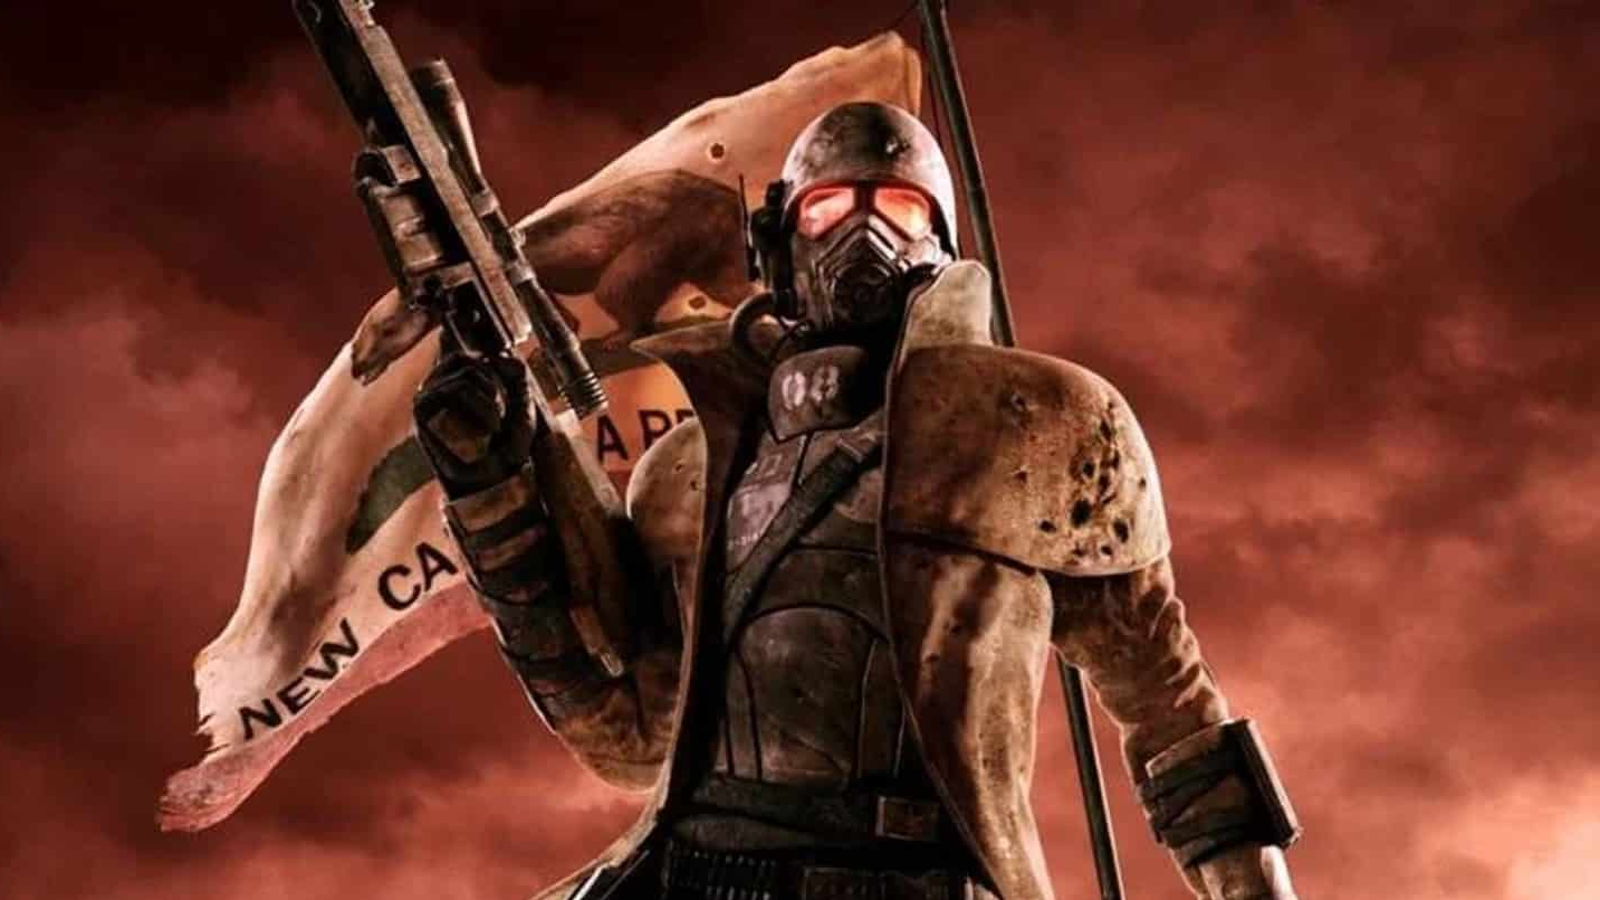 Fallout: New Vegas 2 is reportedly in early talks at Obsidian